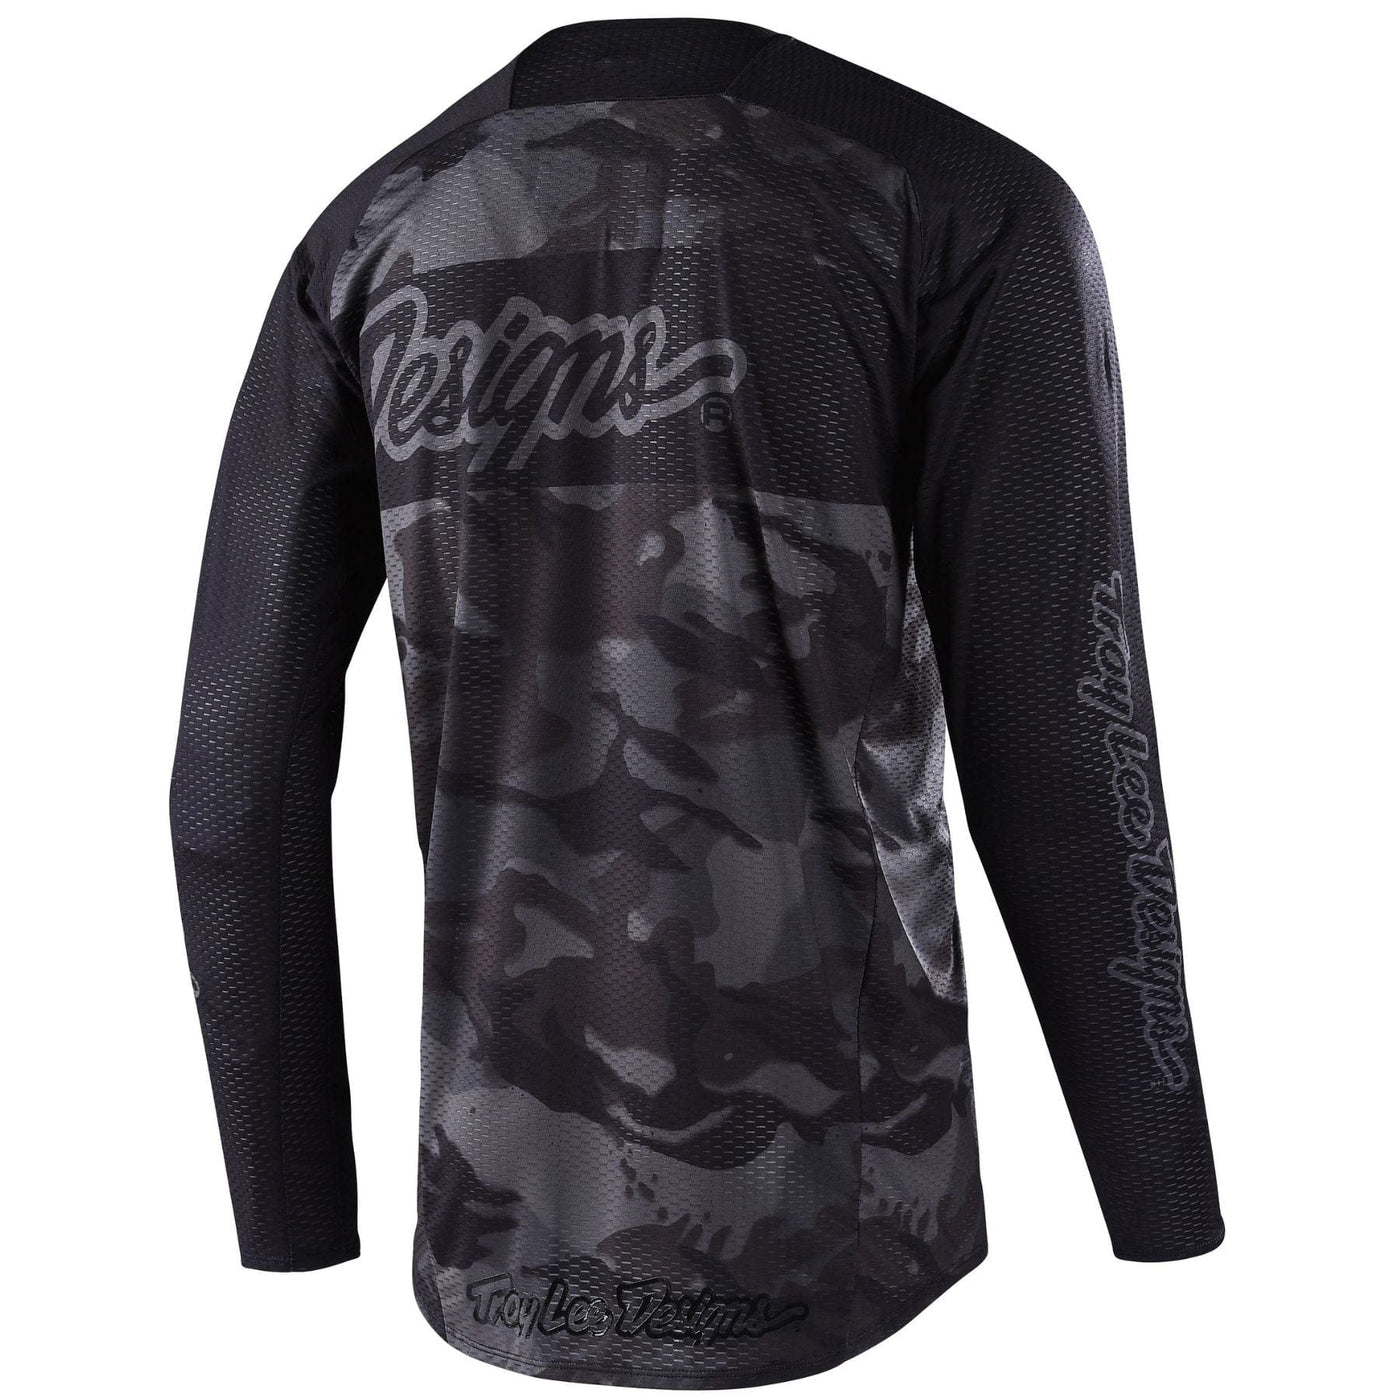 Troy Lee Designs SE PRO AIR Jersey Vox - Camo Black 8Lines Shop - Fast Shipping